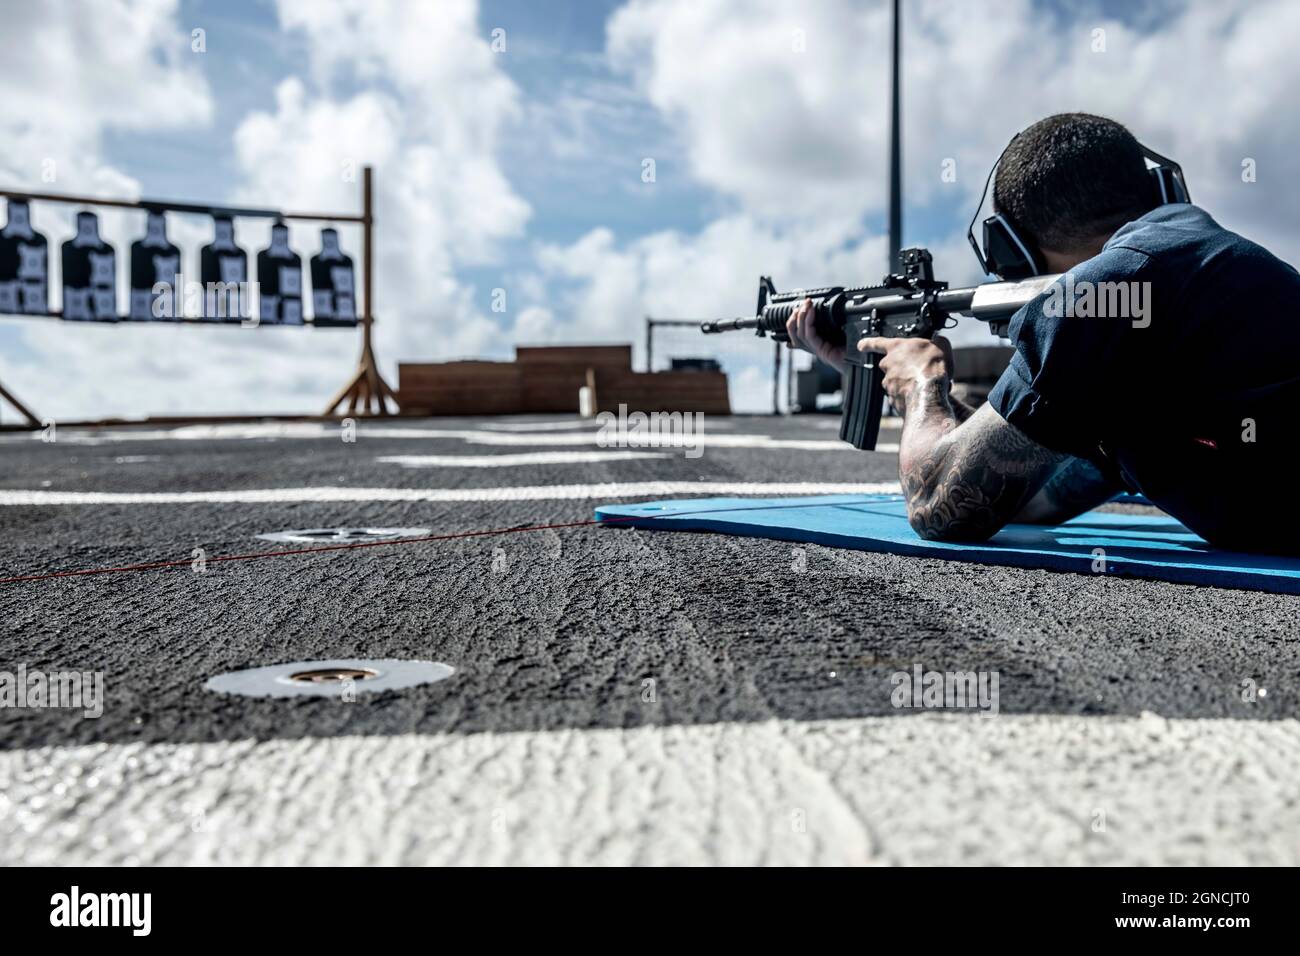 SOUTH CHINA SEA (May 25, 2021) Lt. j.g. Elijah Jones, from Rancho Cucamonga, Calif., fires a M4 carbine during a live-fire exercise aboard the Arleigh Burke-class guided-missile destroyer USS Curtis Wilbur (DDG 54). Curtis Wilbur is assigned to Commander, Task Force 71/Destroyer Squadron (DESRON) 15, the NavyÕs largest forward-deployed DESRON and U.S. 7th FleetÕs principal surface force. (U.S. Navy photo by Mass Communication Specialist 3rd Class Zenaida Roth) 210525-N-XU073-1055 Stock Photo